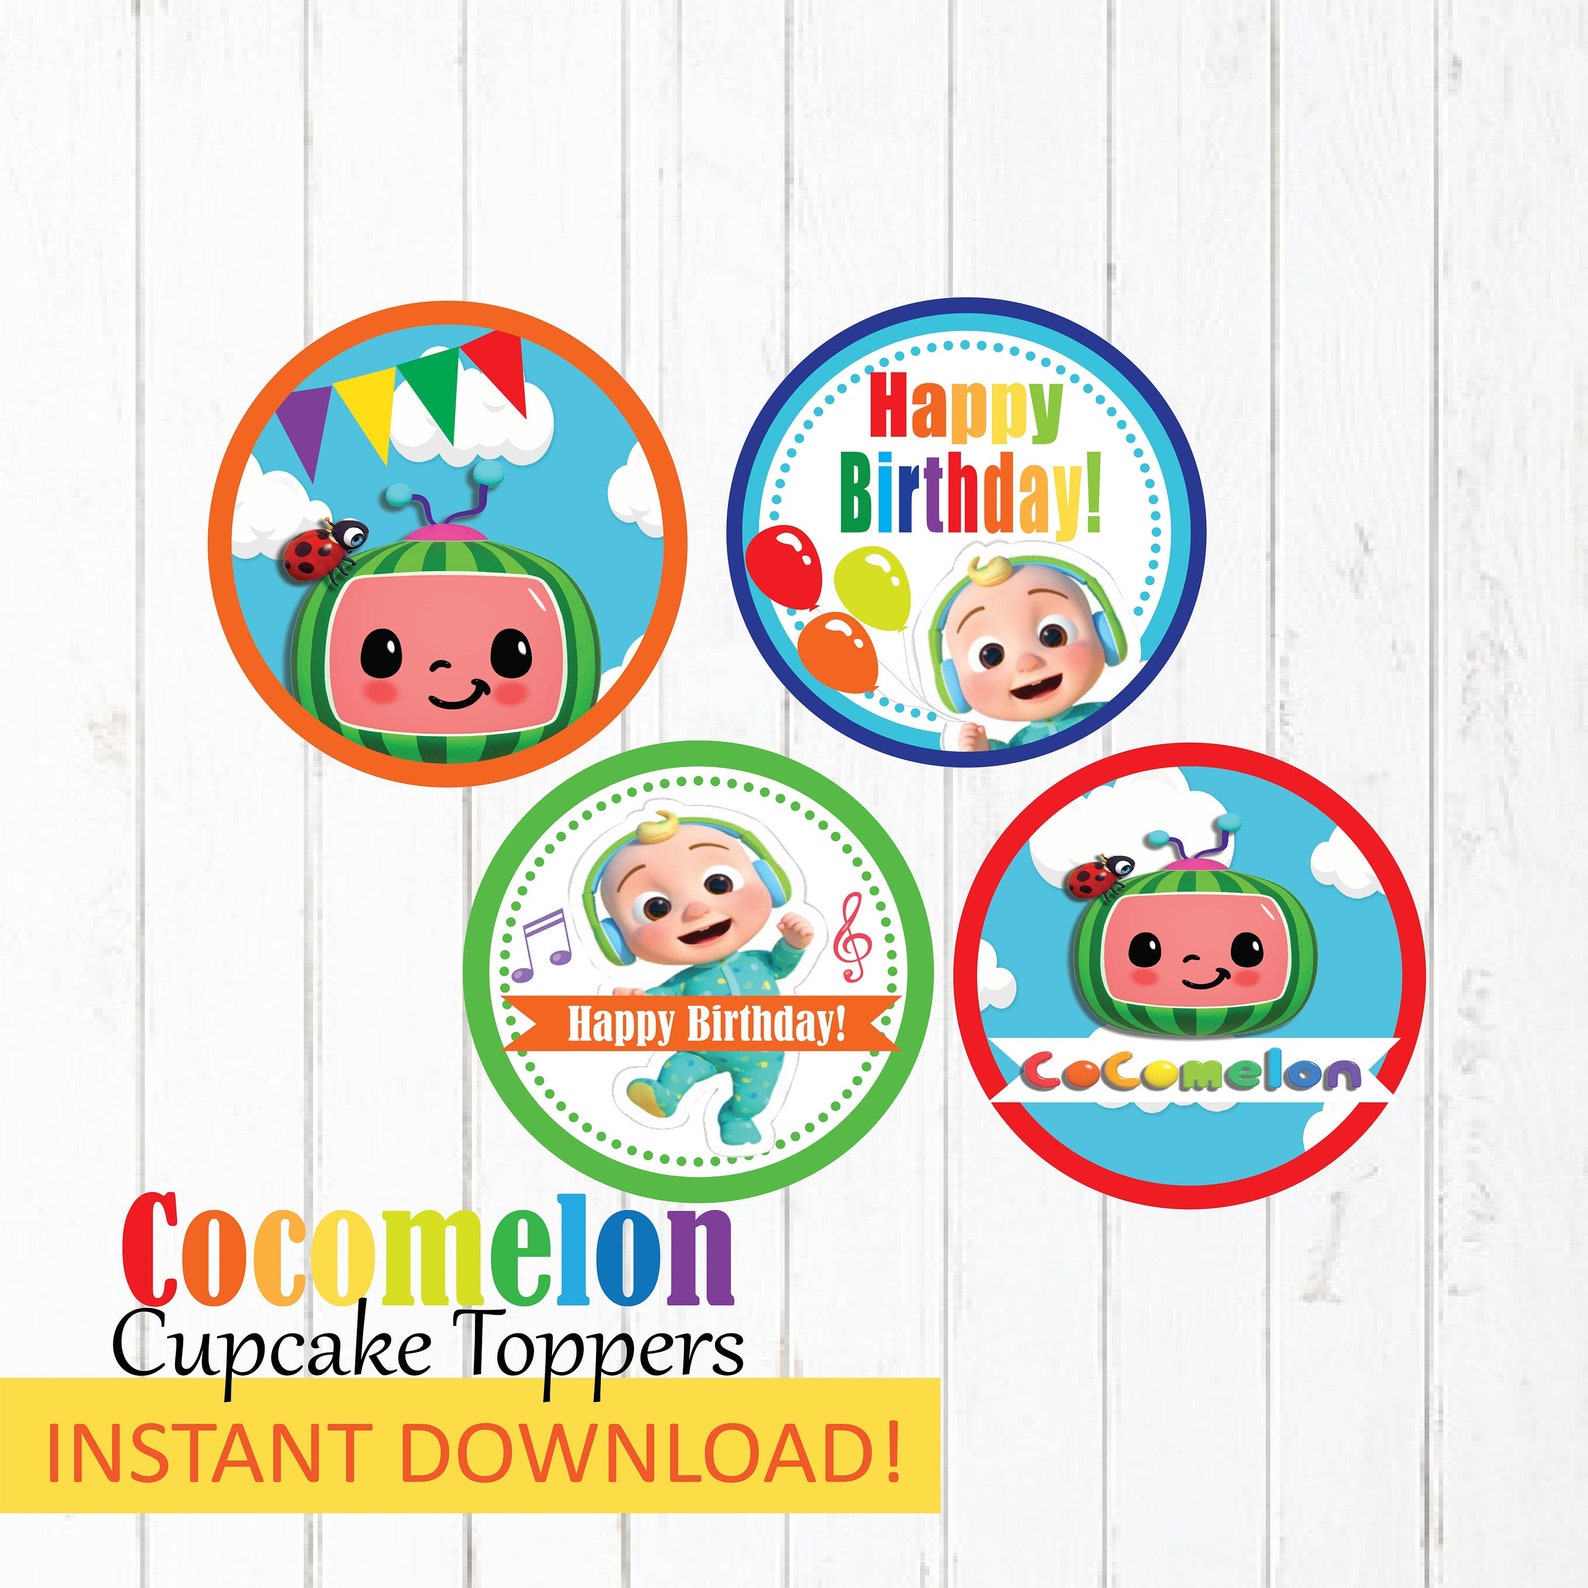 Cocomelon Cupcake Toppers Printable Cupcake Toppers Etsy